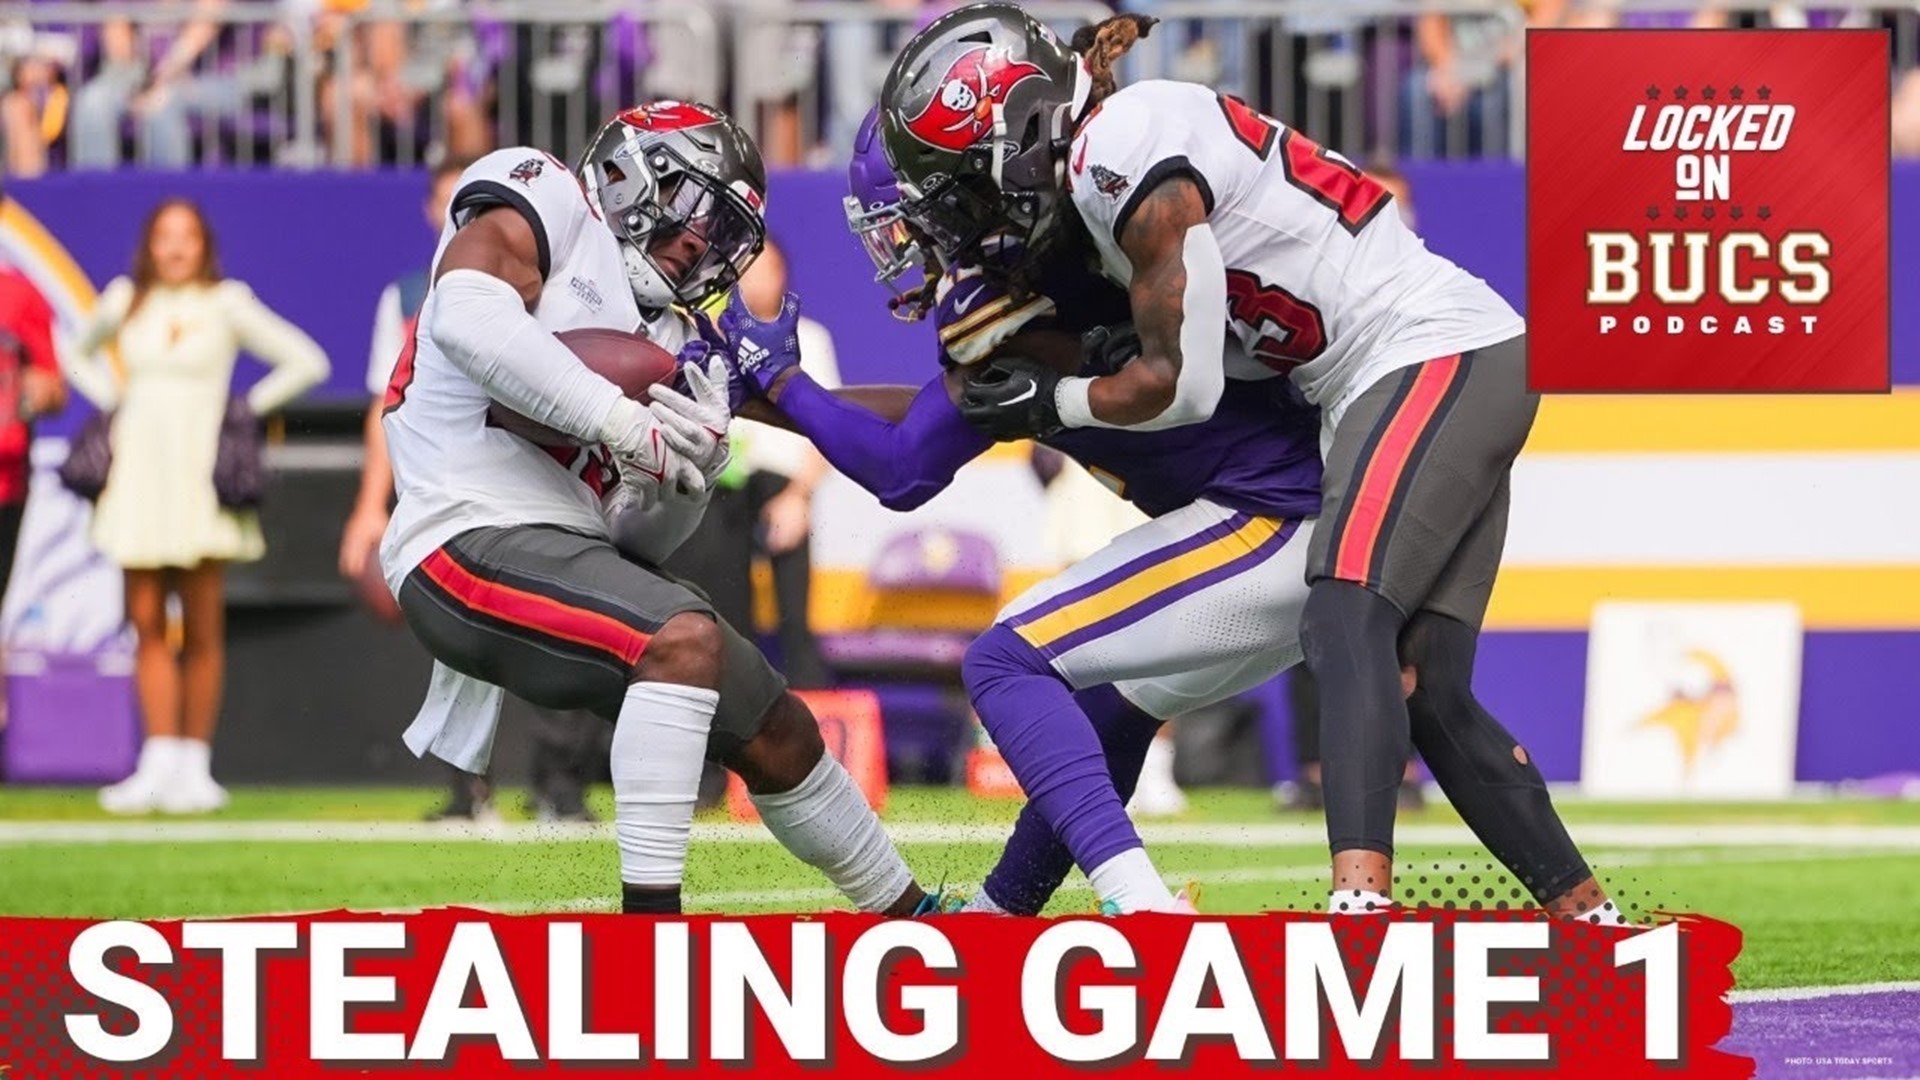 Tampa Bay Buccaneers quarterback Baker Mayfield found his groove while linebacker Devin White set the tone on defense as the Bucs upset the Minnesota Vikings 20-17.